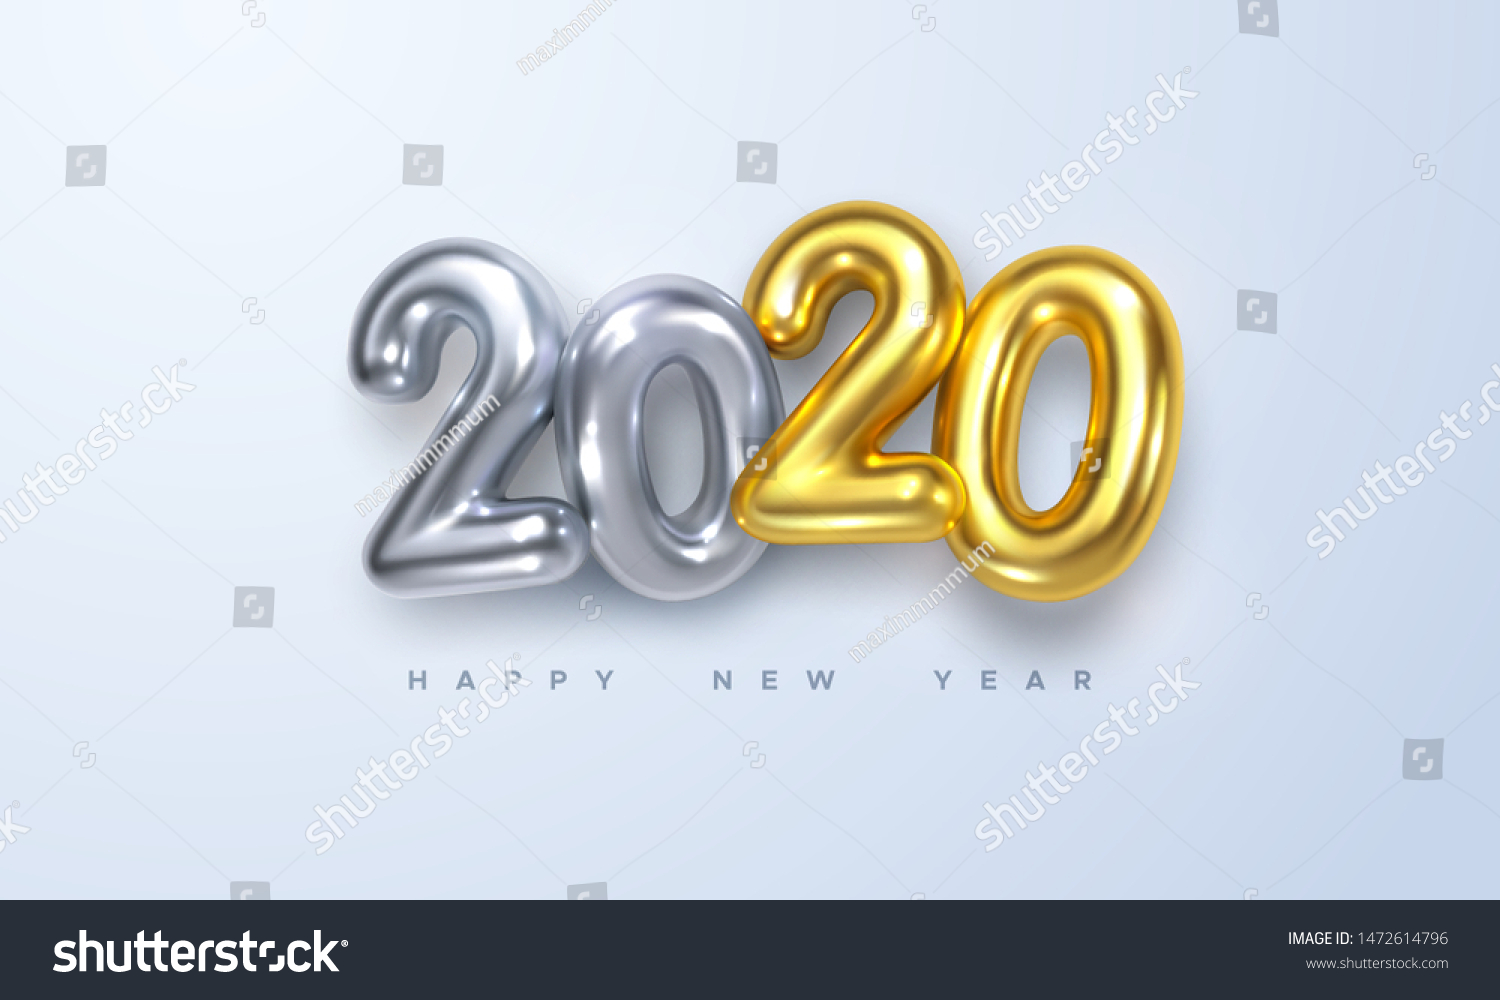 Happy New 2020 Year. Holiday vector illustration of silver and golden metallic numbers 2020. Realistic 3d sign. Festive poster or banner design #1472614796